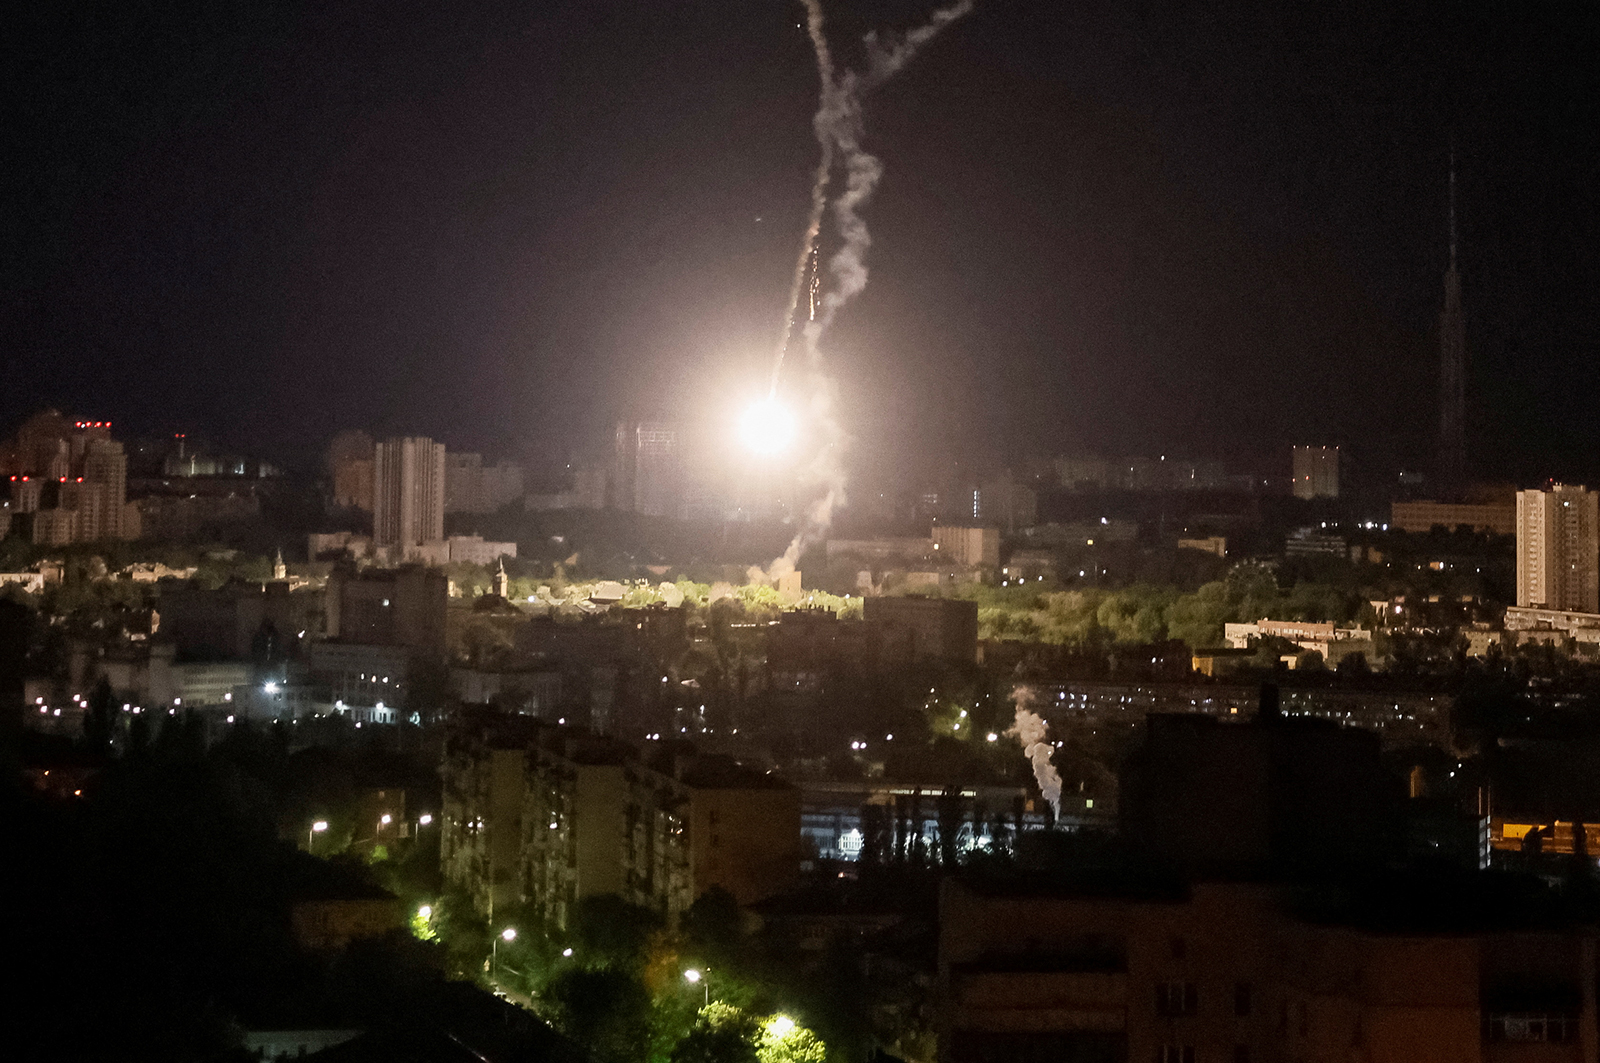 Explosion of a missile is seen in the sky over the city during a Russian missile strike in Kyiv, Ukraine, on May 16.